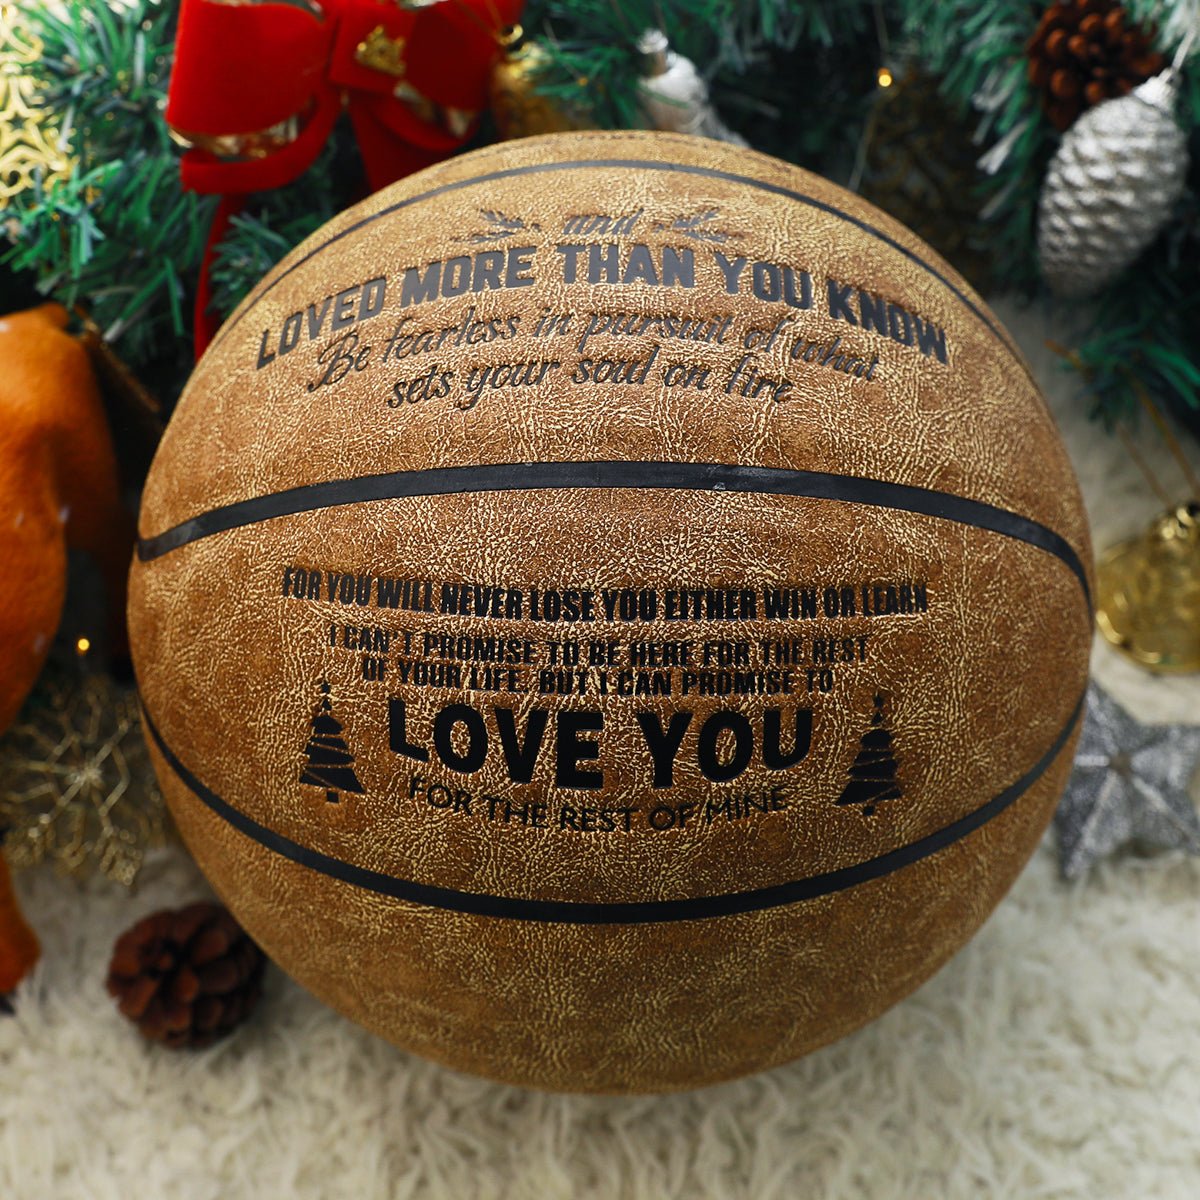 Personalized Letter Basketball For Grandson, Basketball Indoor/Outdoor Game Ball For Boy, Birthday Christmas Gift For Grandson, Christmas - Family Watchs